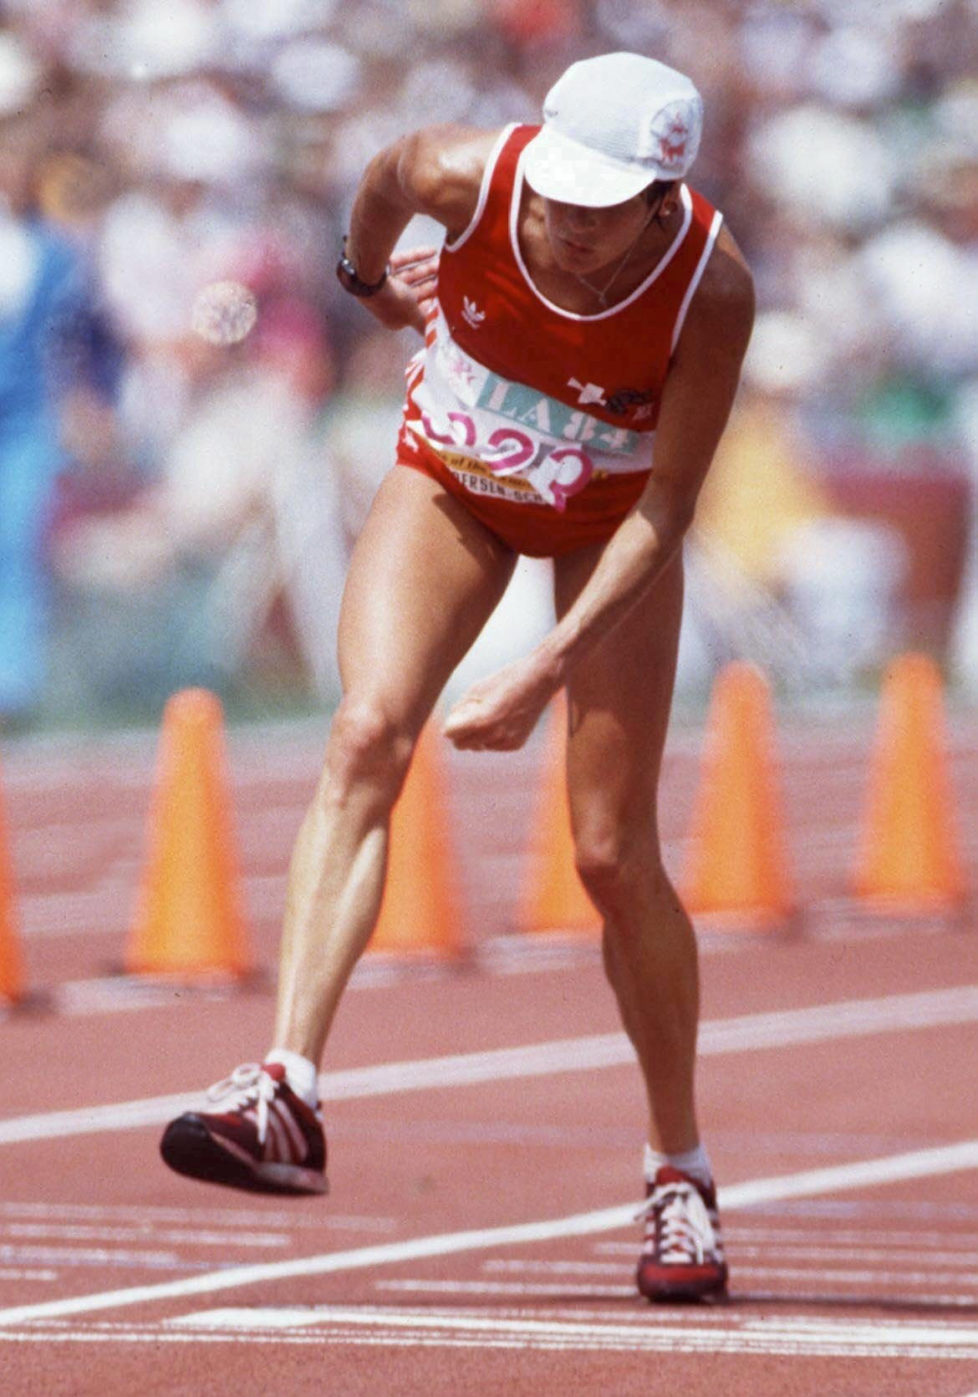 LOS ANGELES, UNITED STATES - AUGUST 20: LOS ANGELES 1984; MARATHON: Gaby ANDERSEN - SCHIESS/SUI (Photo by Bongarts/Getty Images)